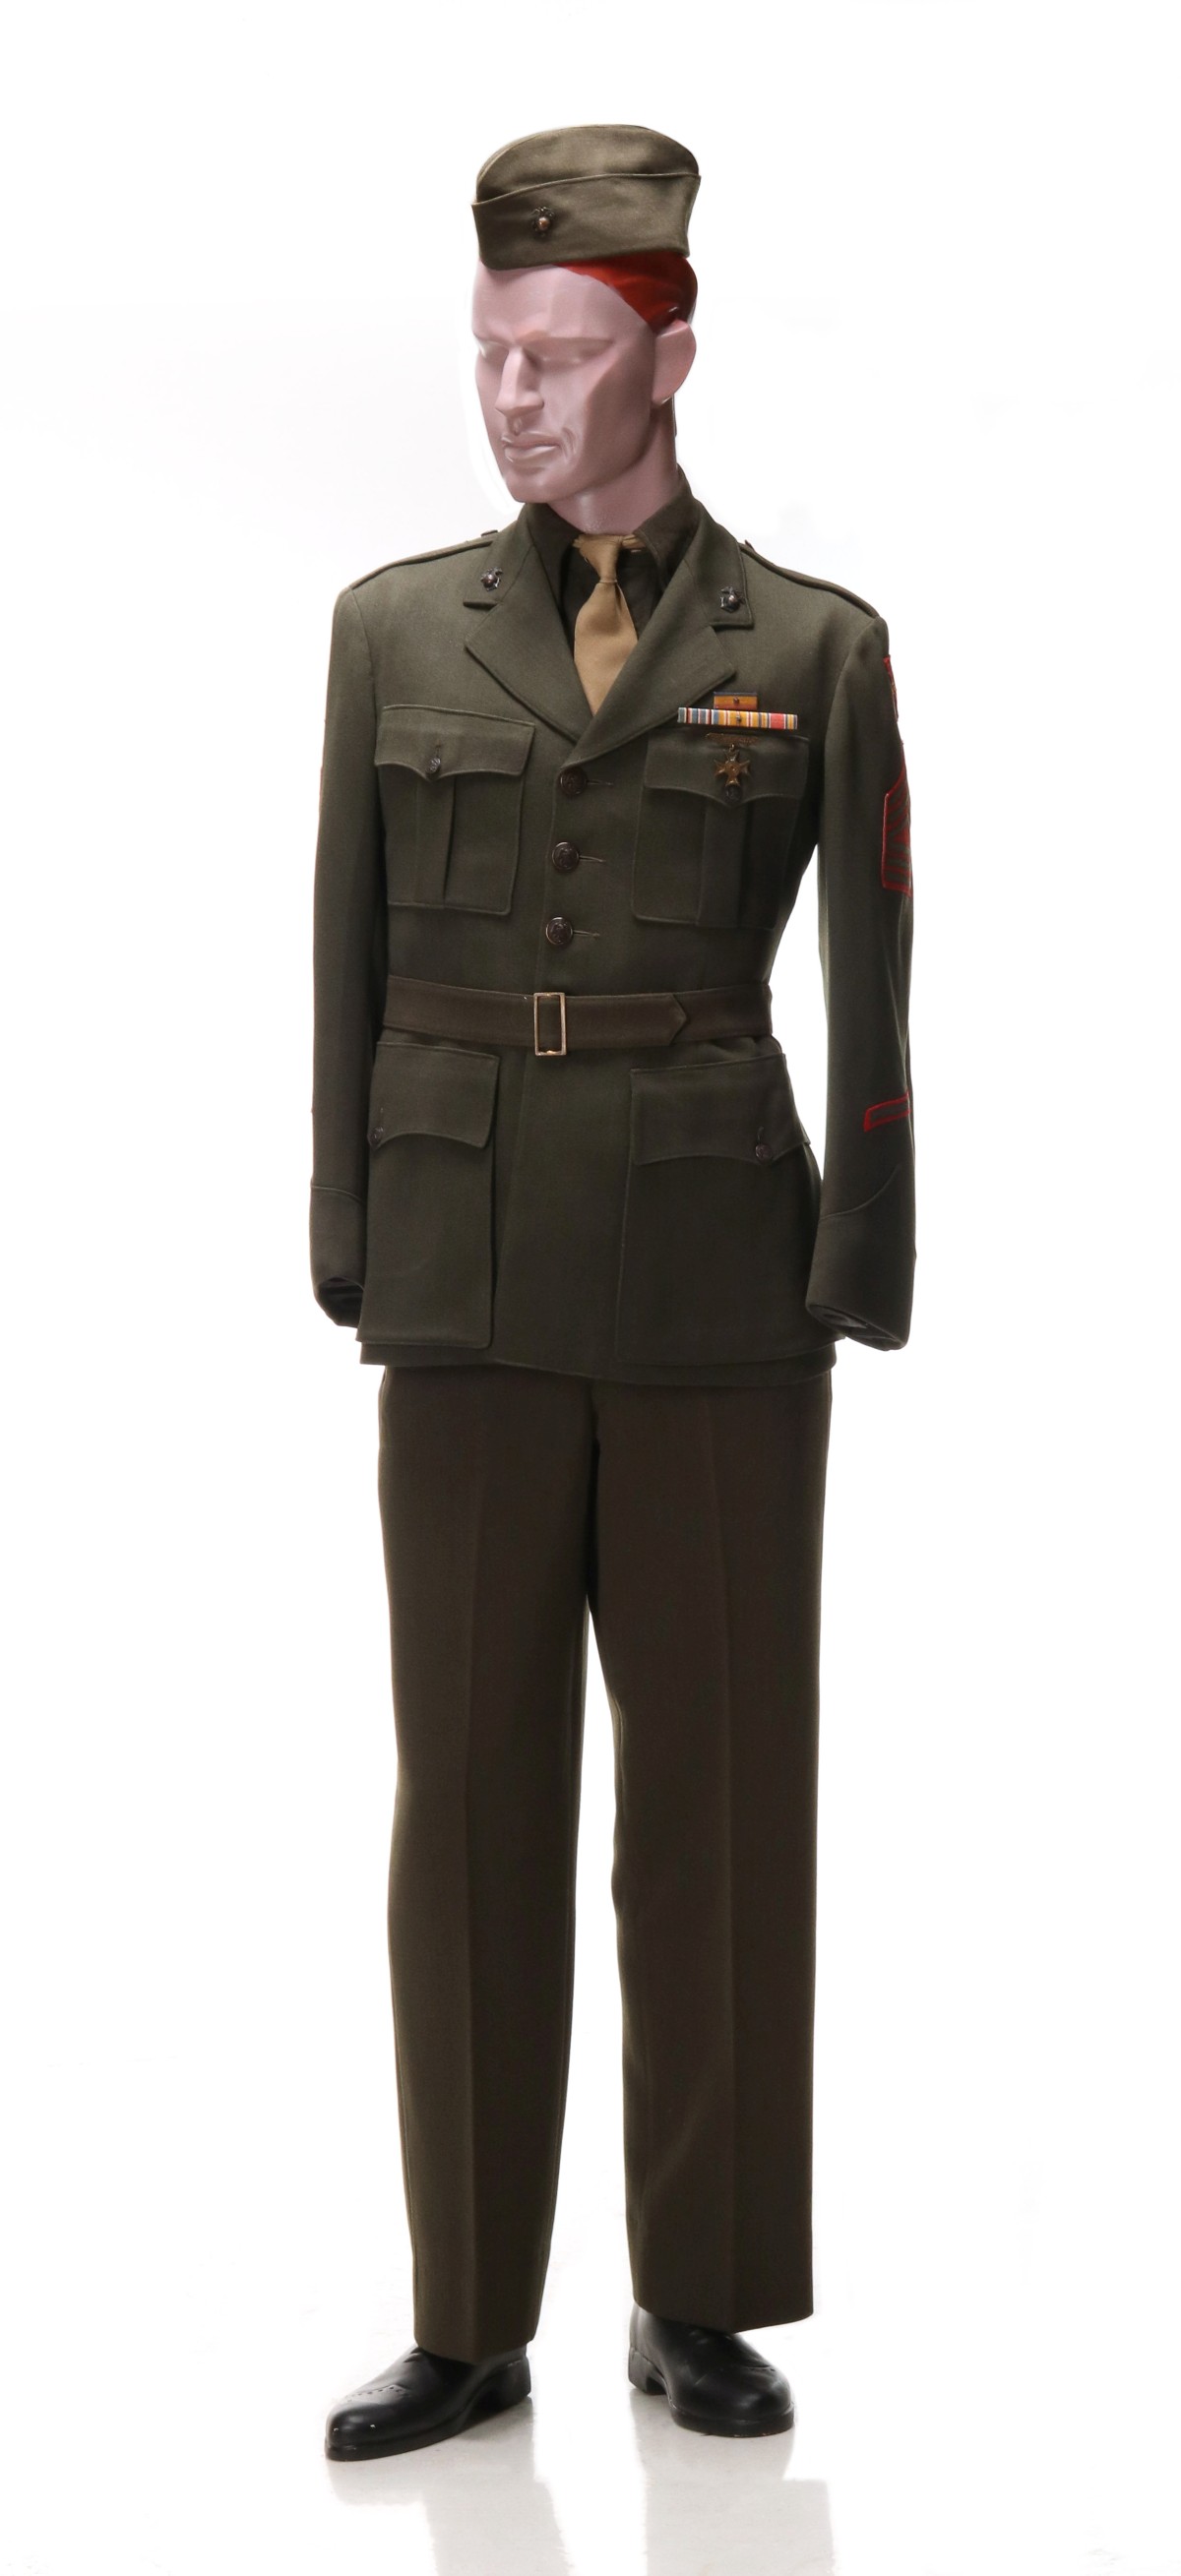 UNIDENTIFIED 36TH INFANTRY AND USMC MASTER SGT UNIFORMS